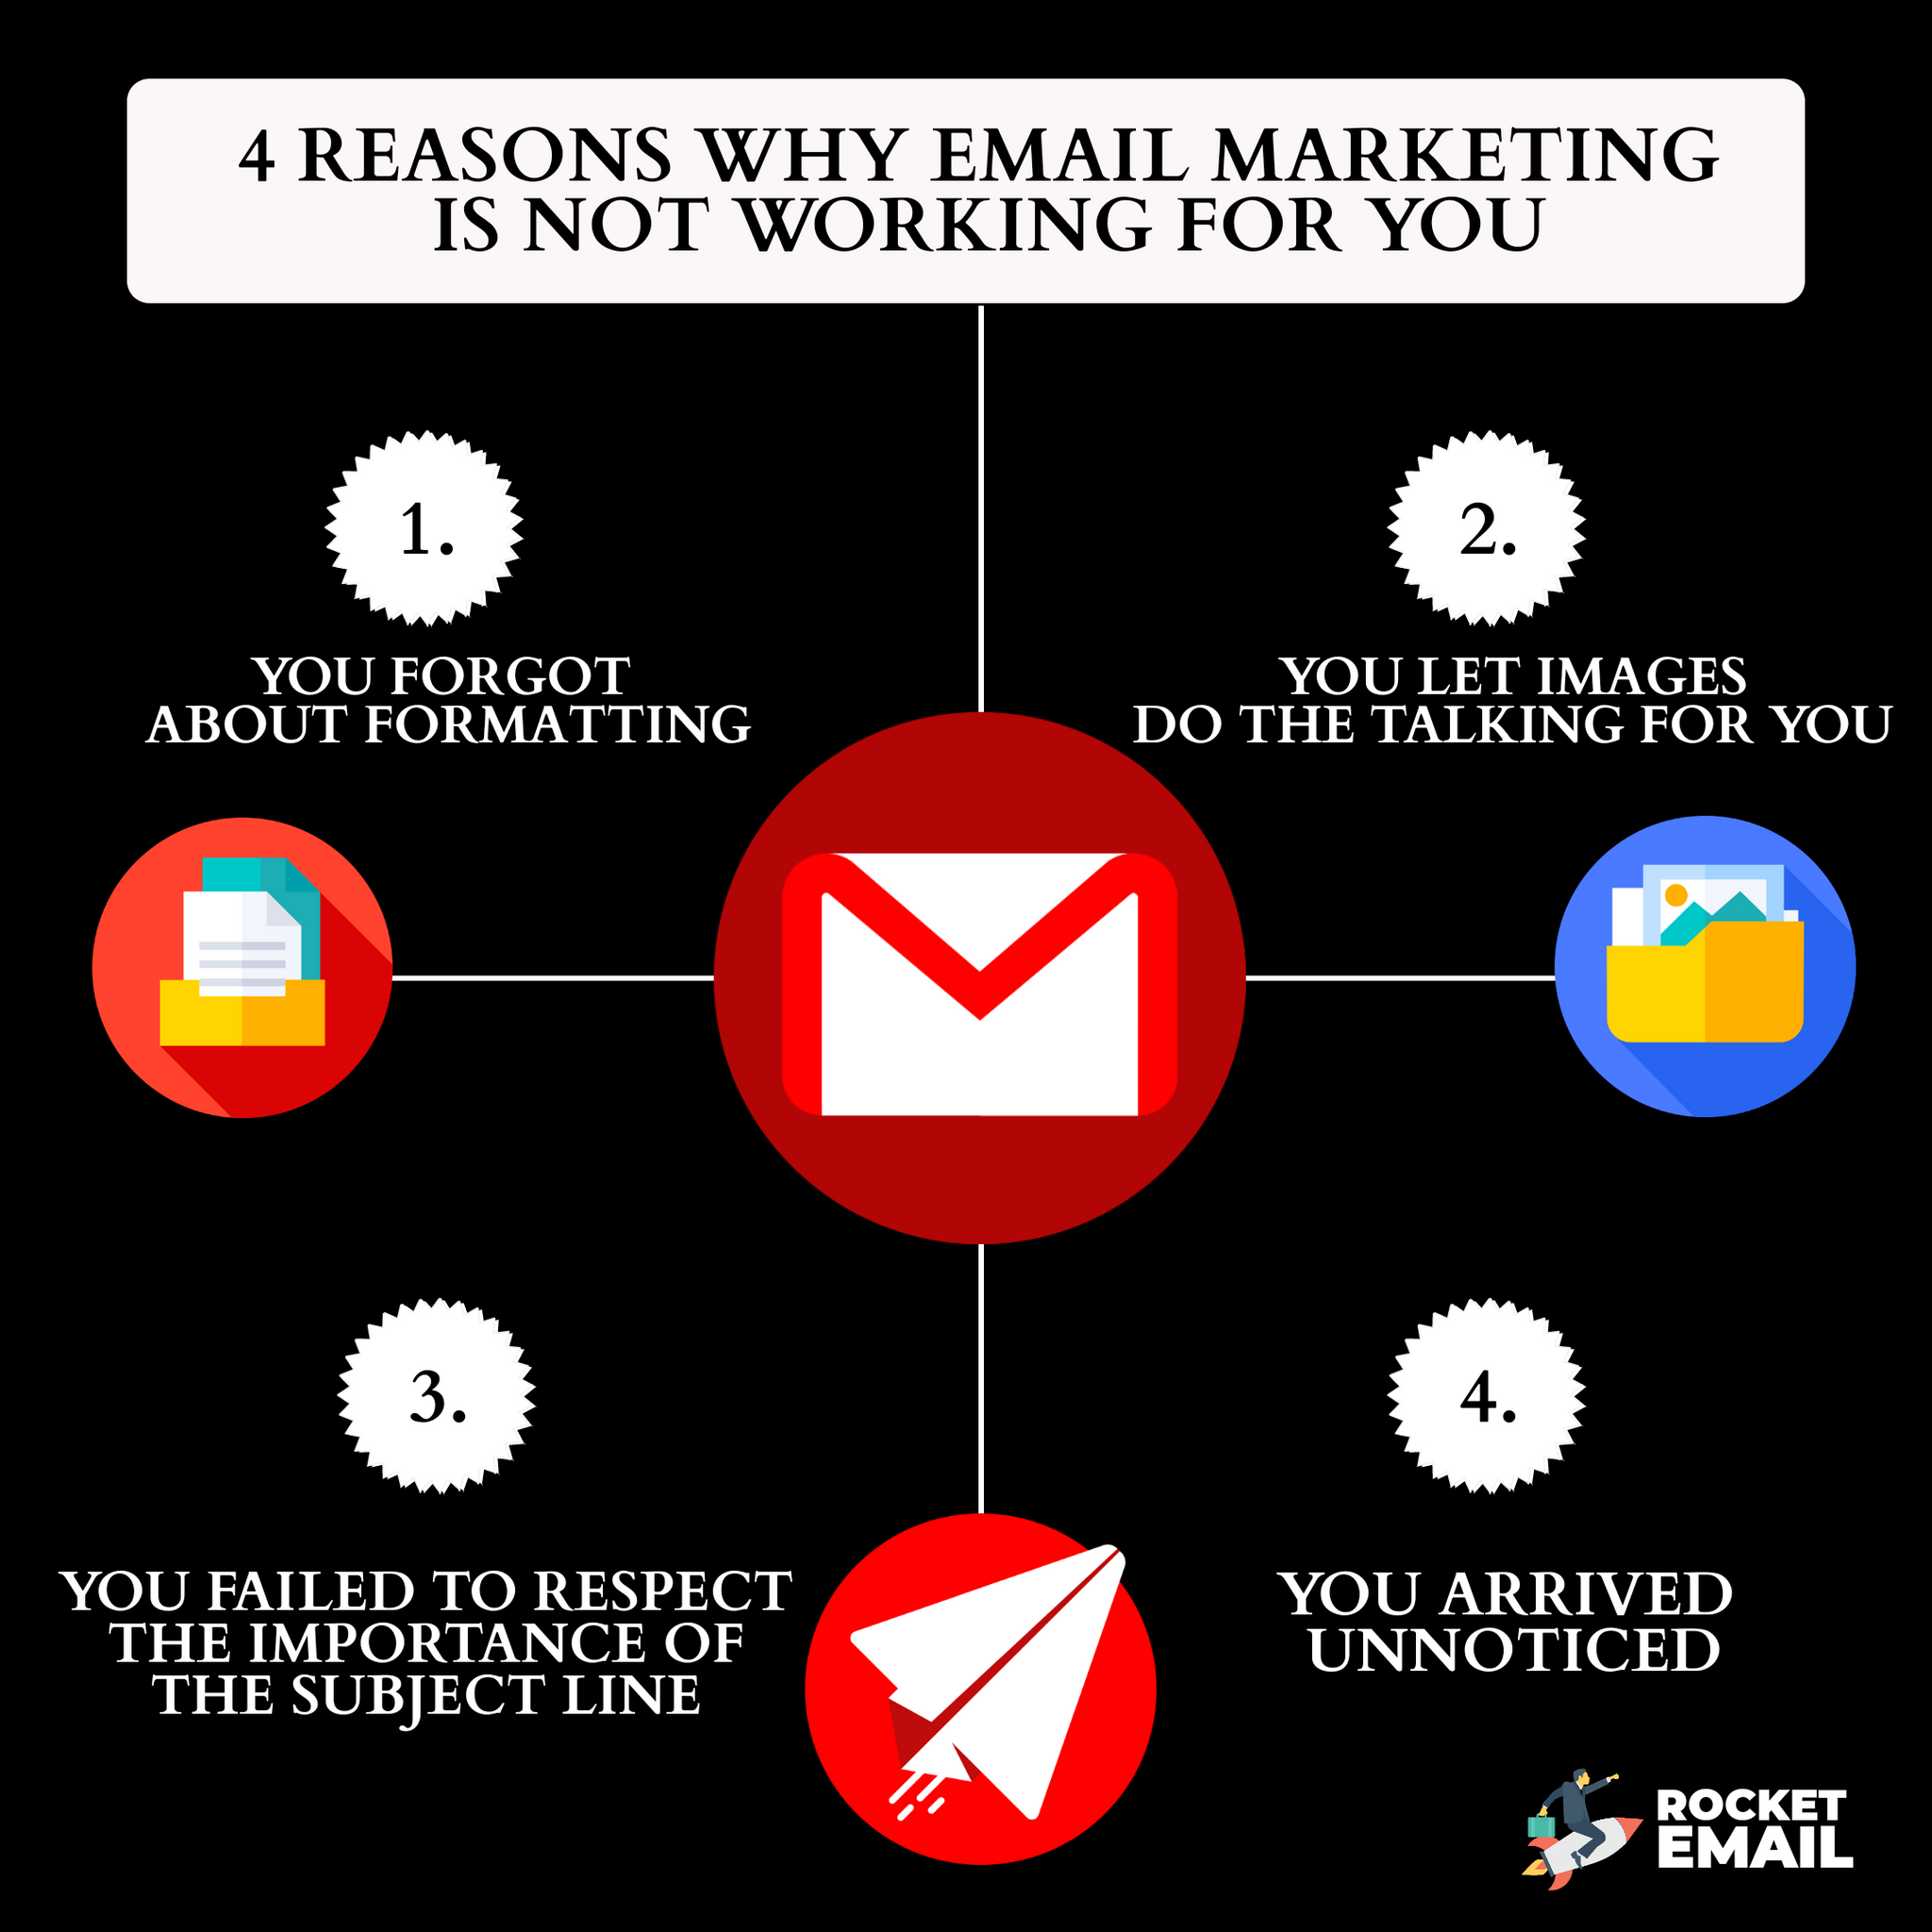 4 Reasons Why Email Marketing is not working for You!